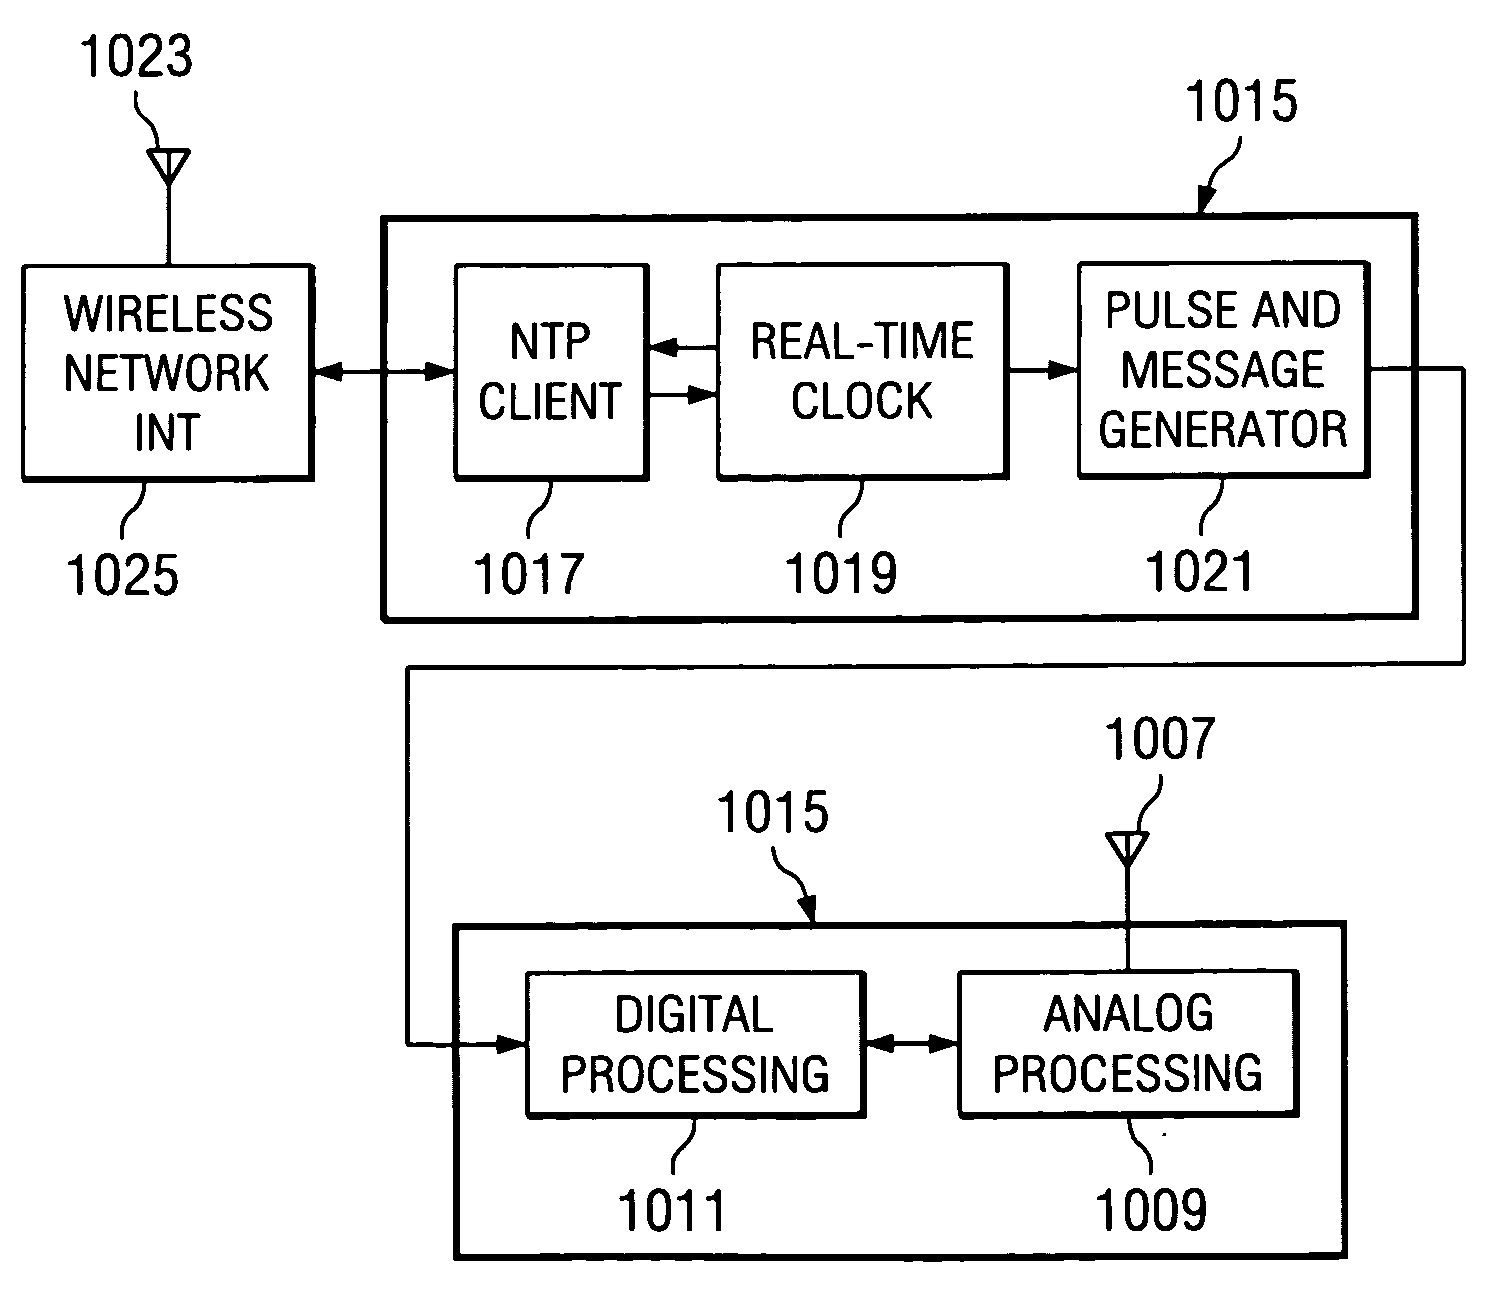 System and method for providing time to a satellite positioning system (SPS) receiver from a networked time server